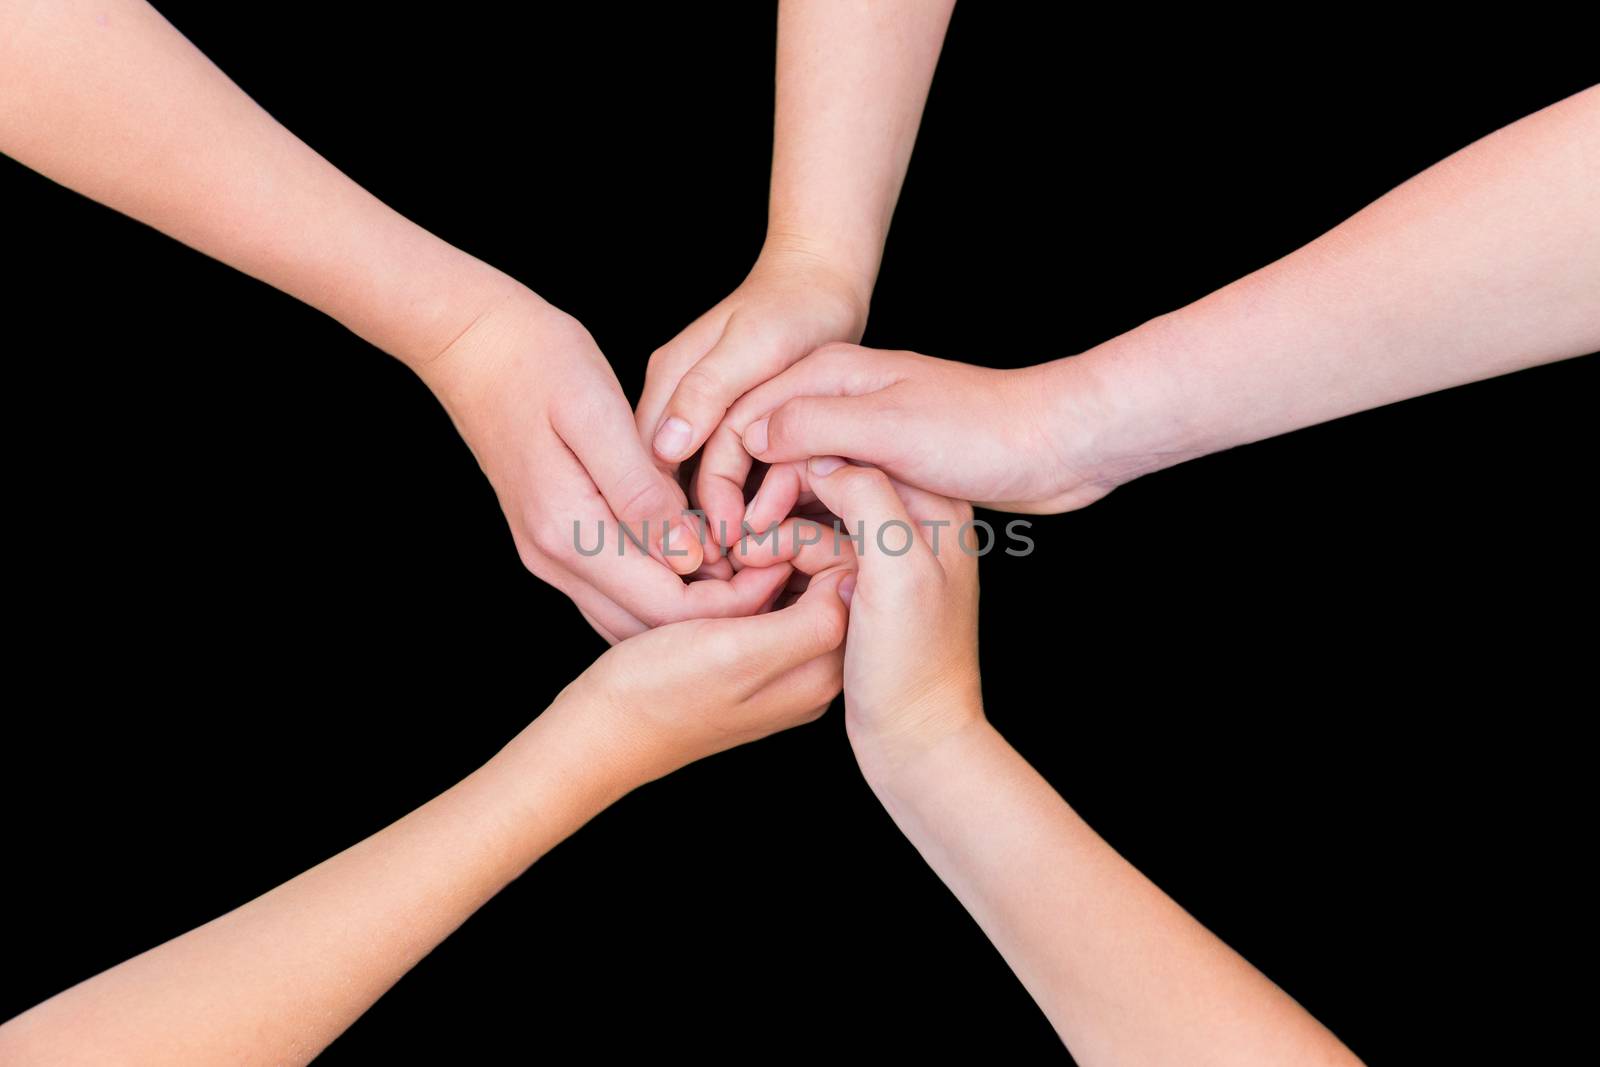 Five children's arms with hands entwined isolated on black background